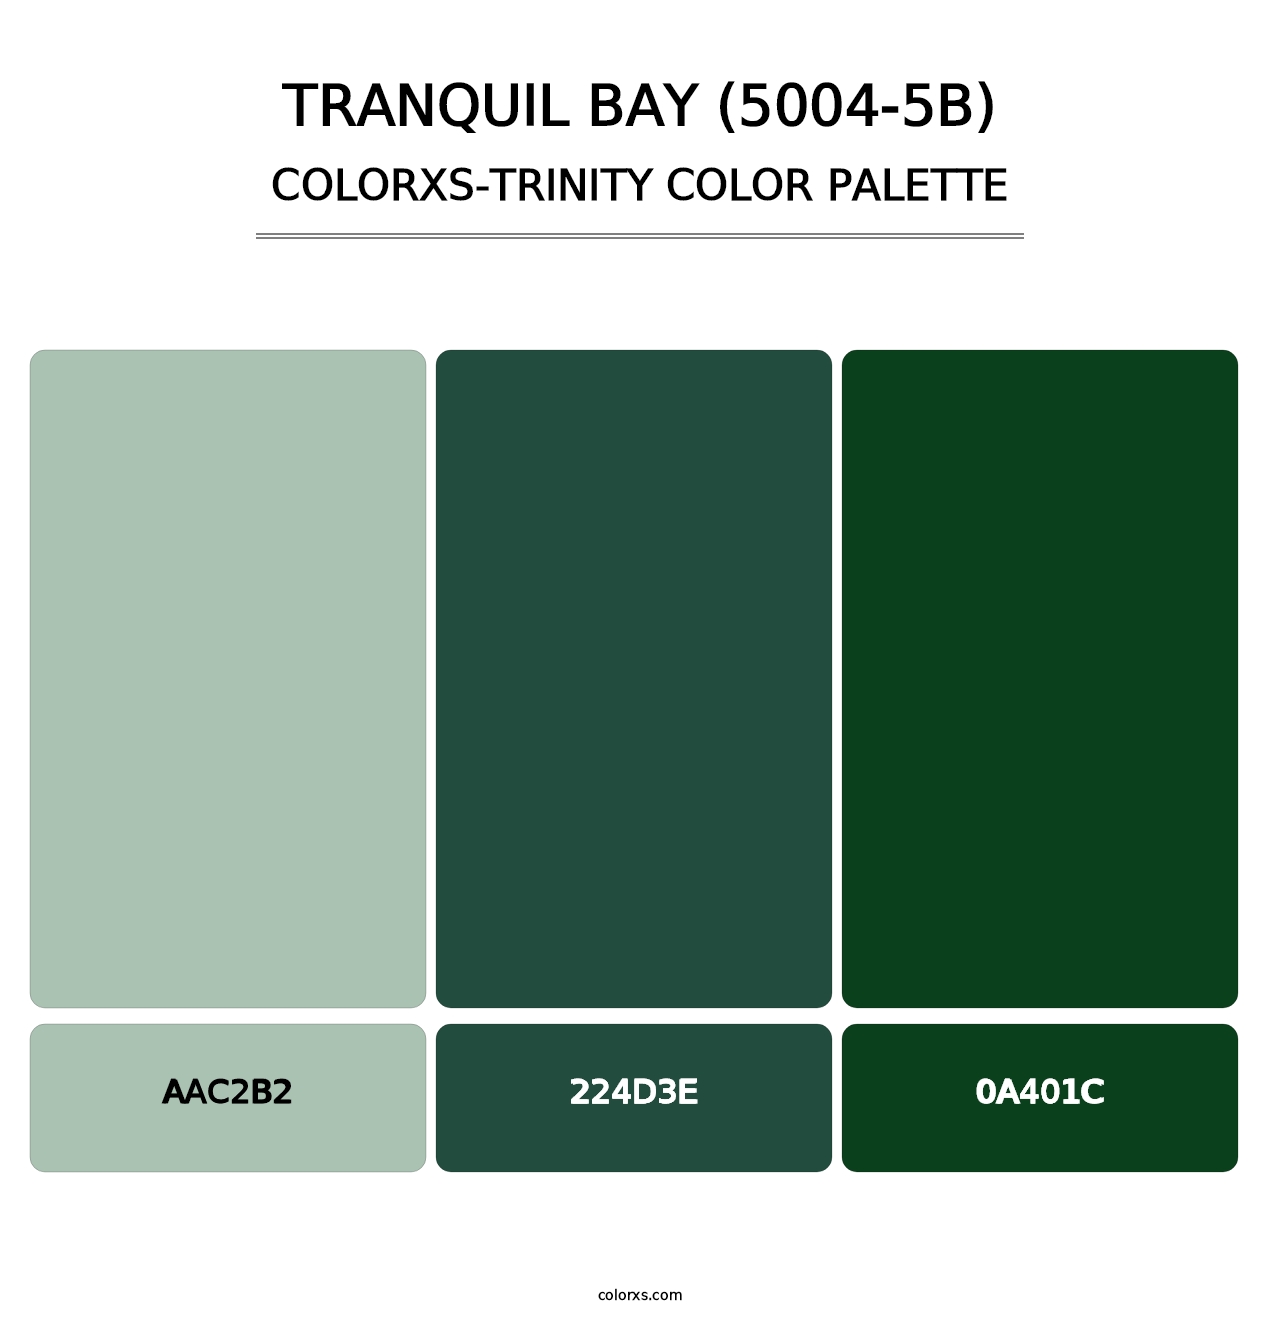 Tranquil Bay (5004-5B) - Colorxs Trinity Palette